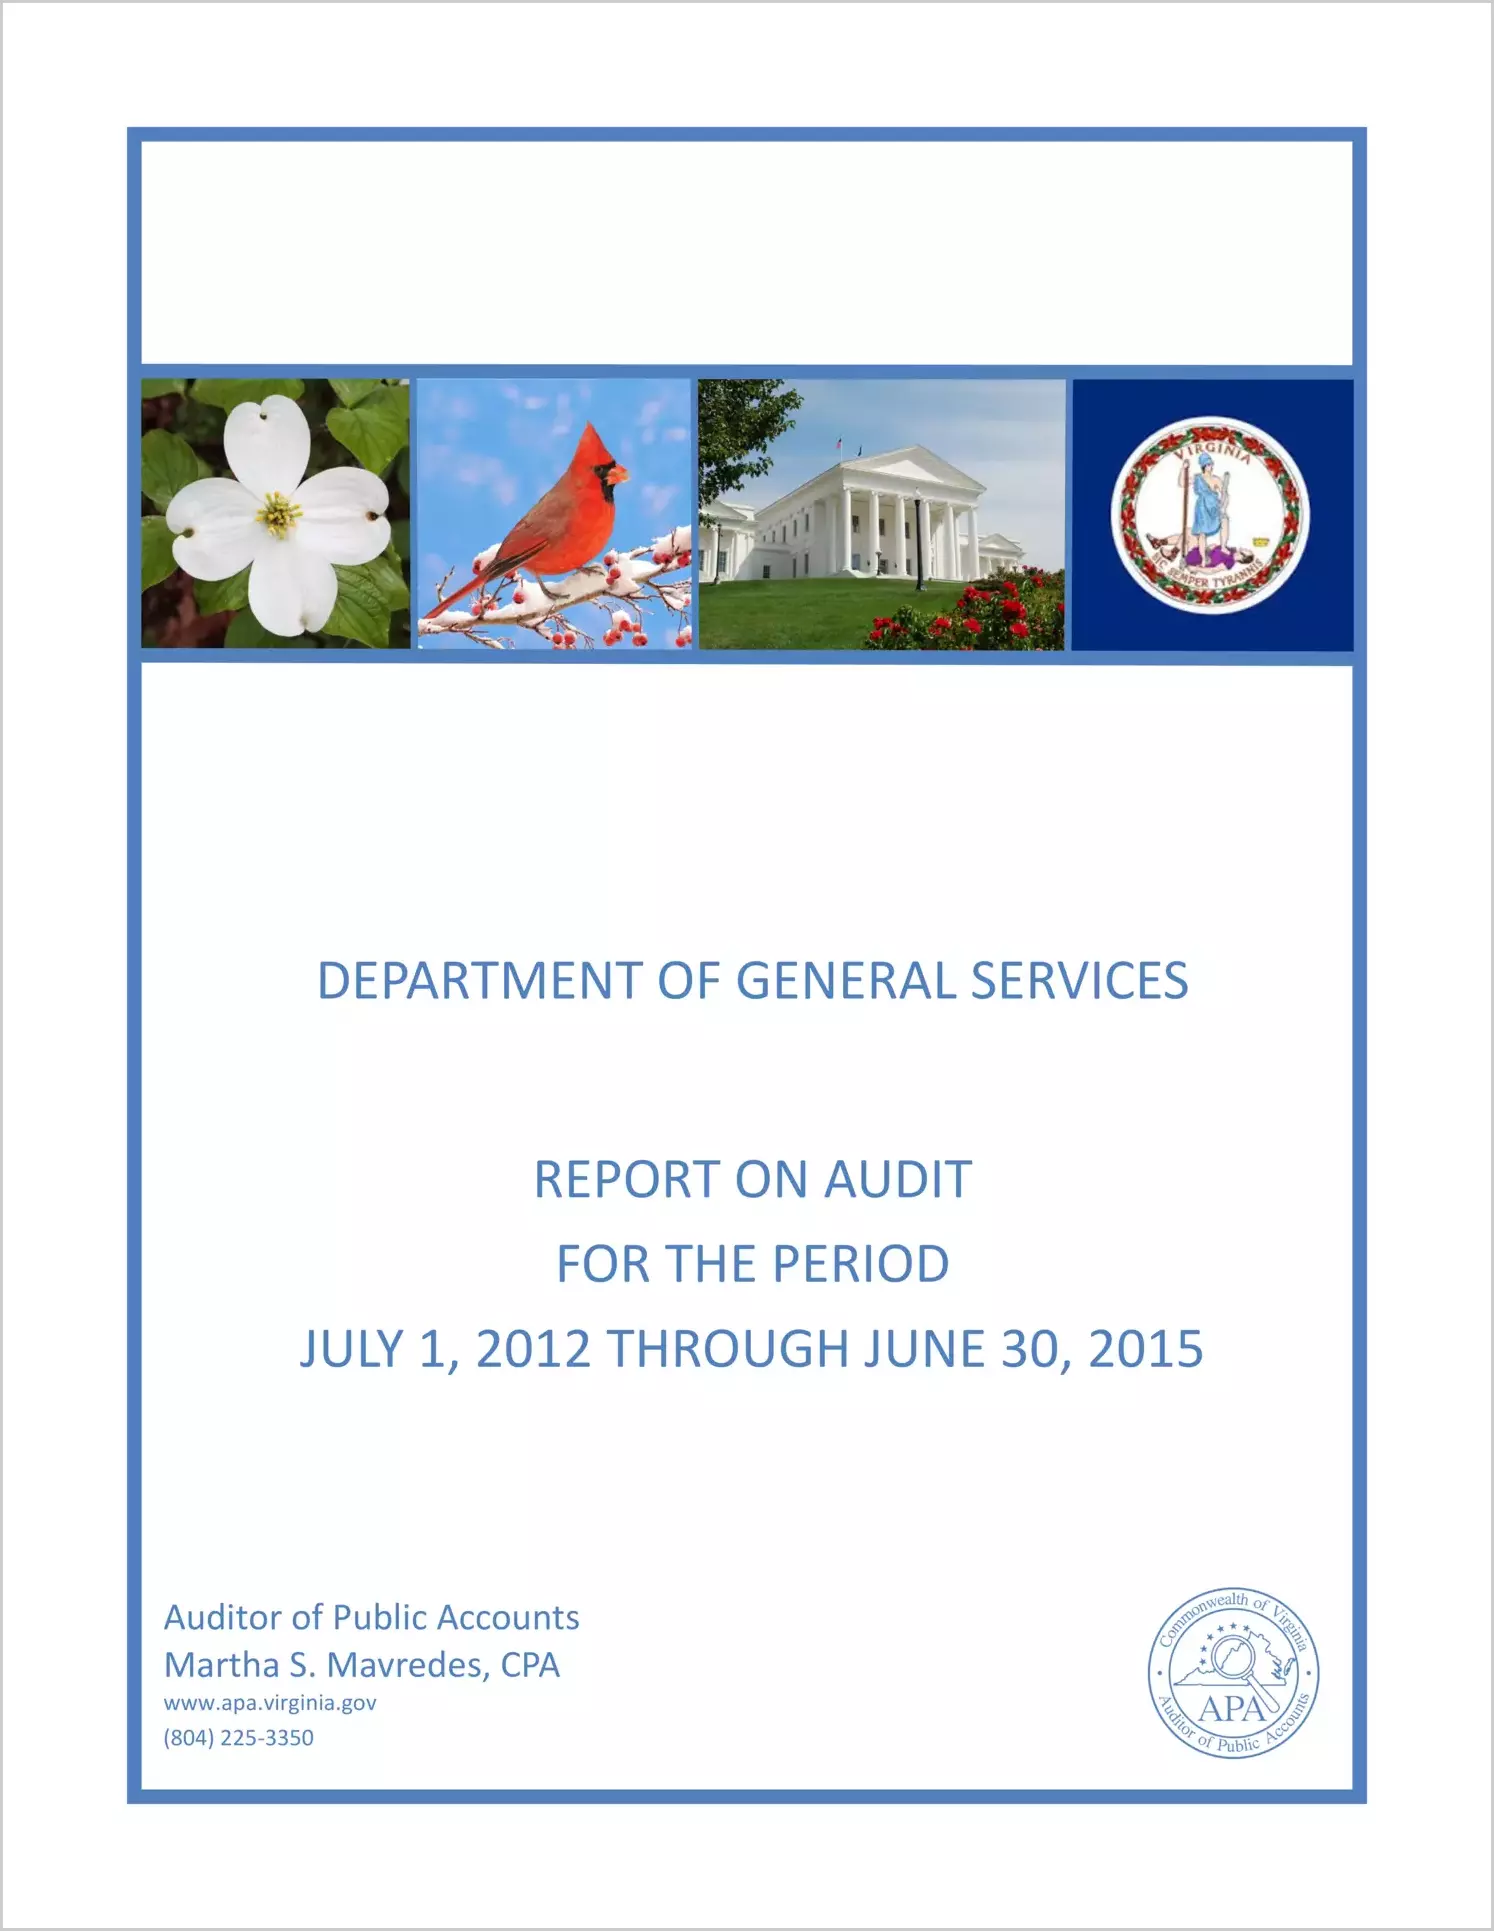 Department of General Services for the period July 1, 2012 through June 30, 2015